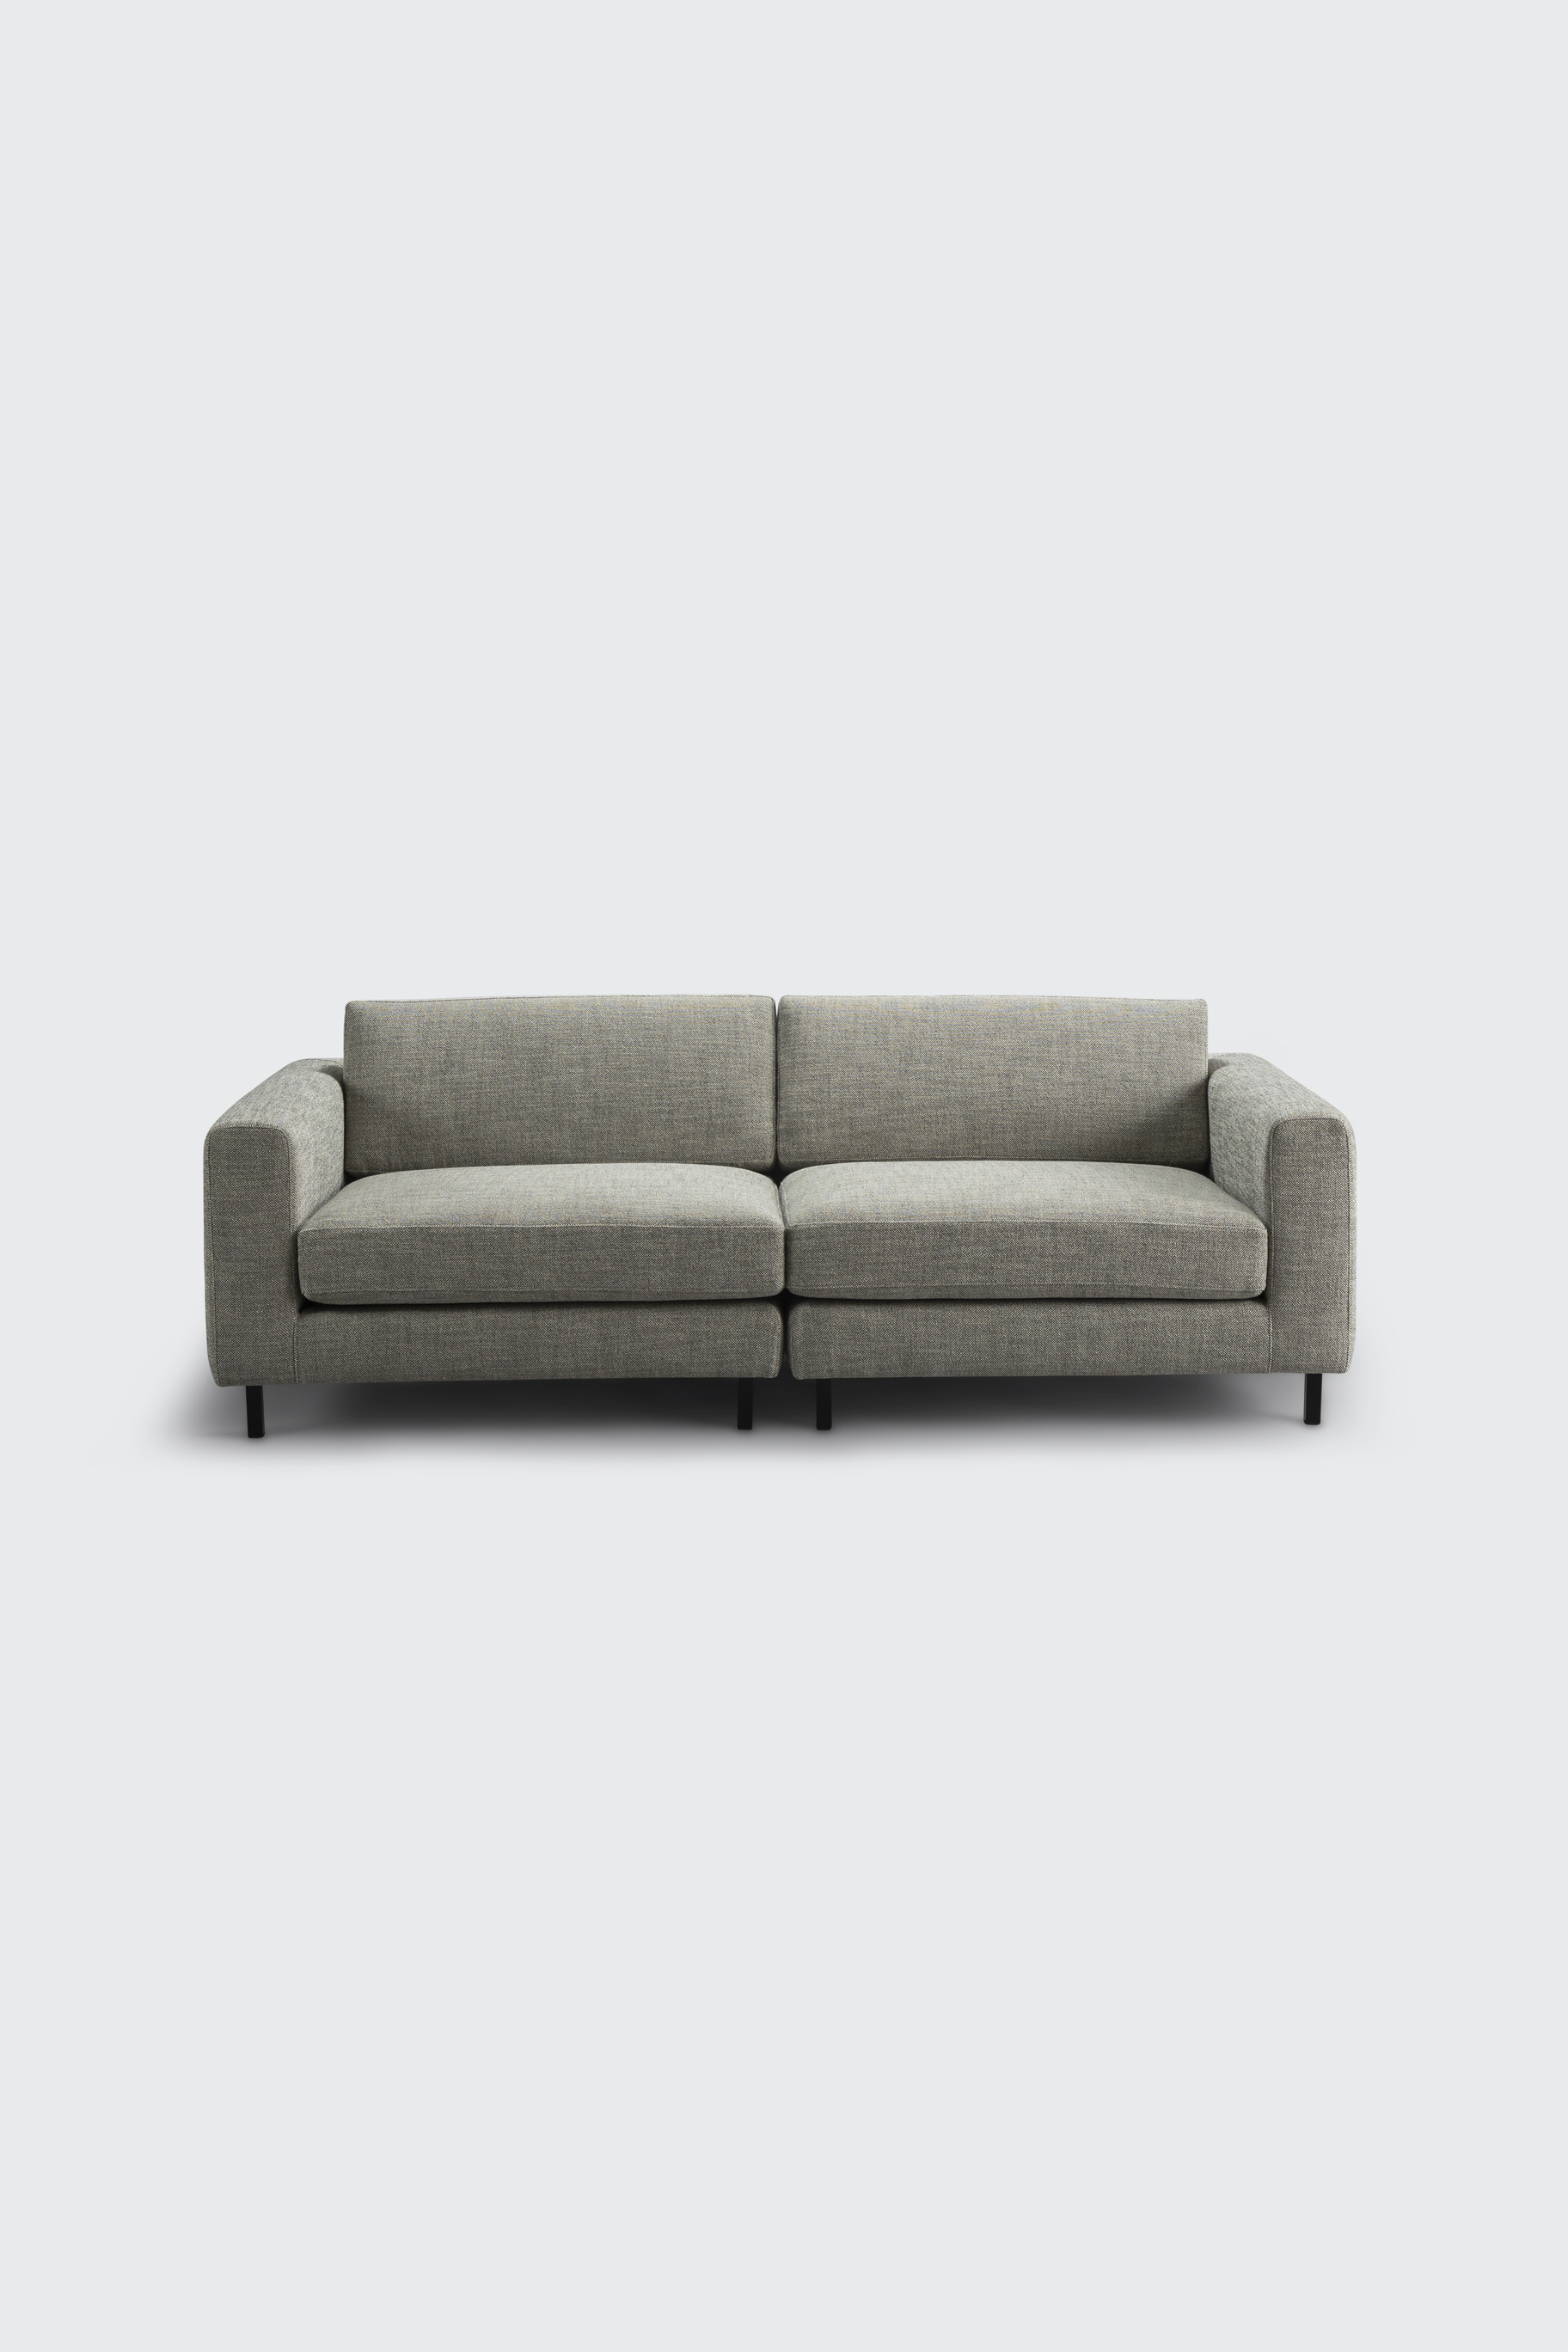 SAV sofa timeless 220 artichoke interior design architecture product furniture luxury_resistant style living room noble lined 220cm decor two separated modules timeless collection